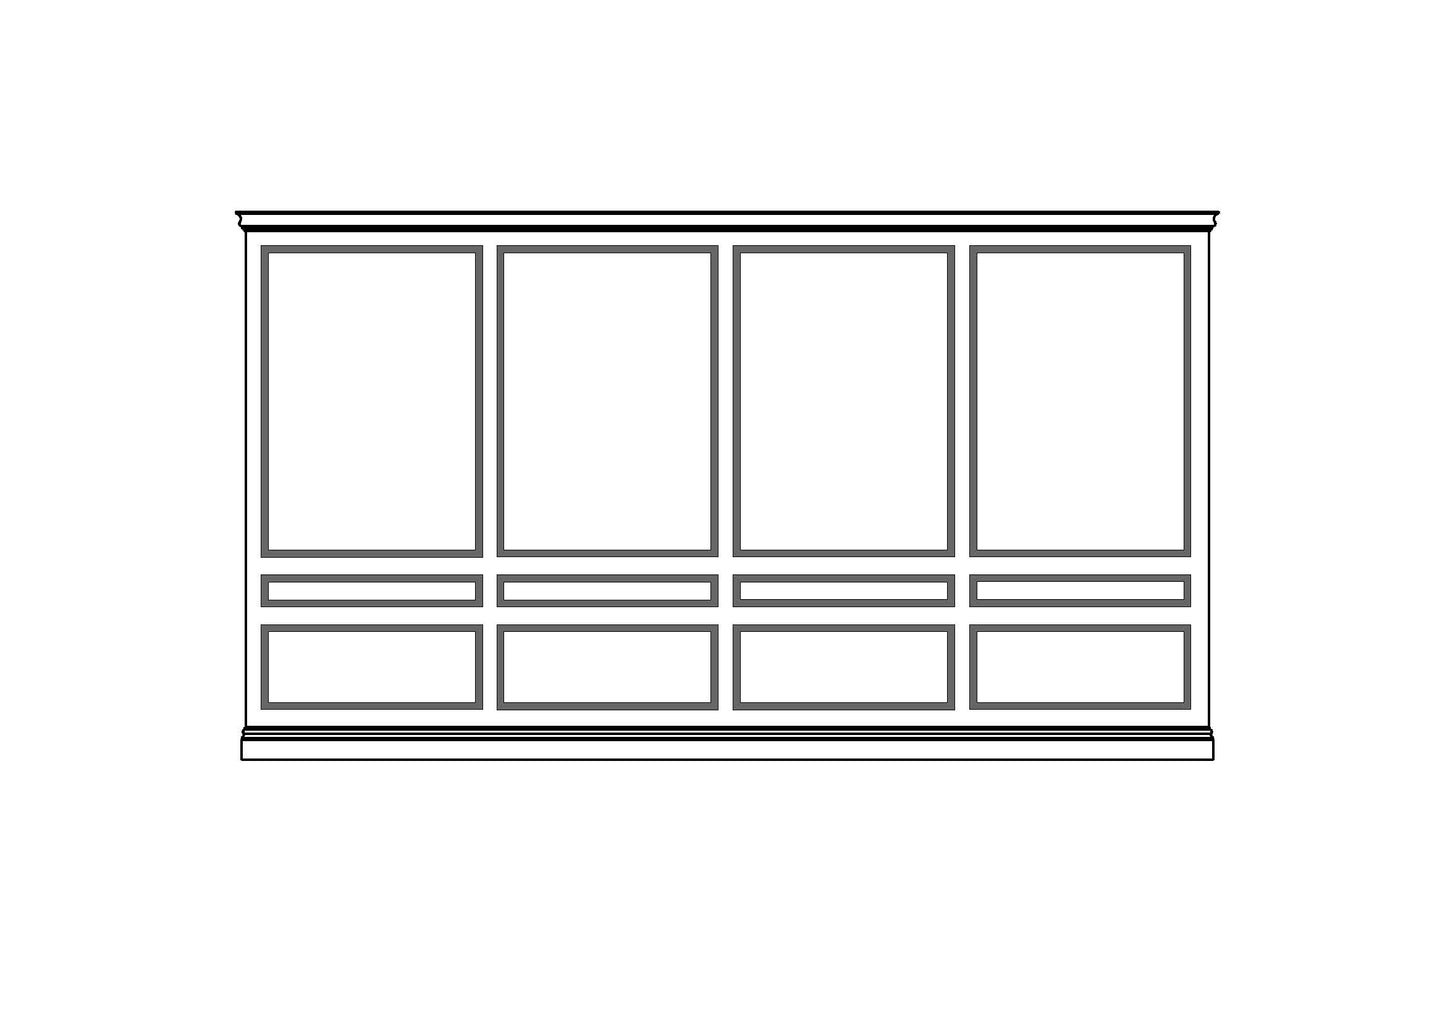 Kit 10A - Jazz Moderne full height split panel wainscoting kit - classic layout